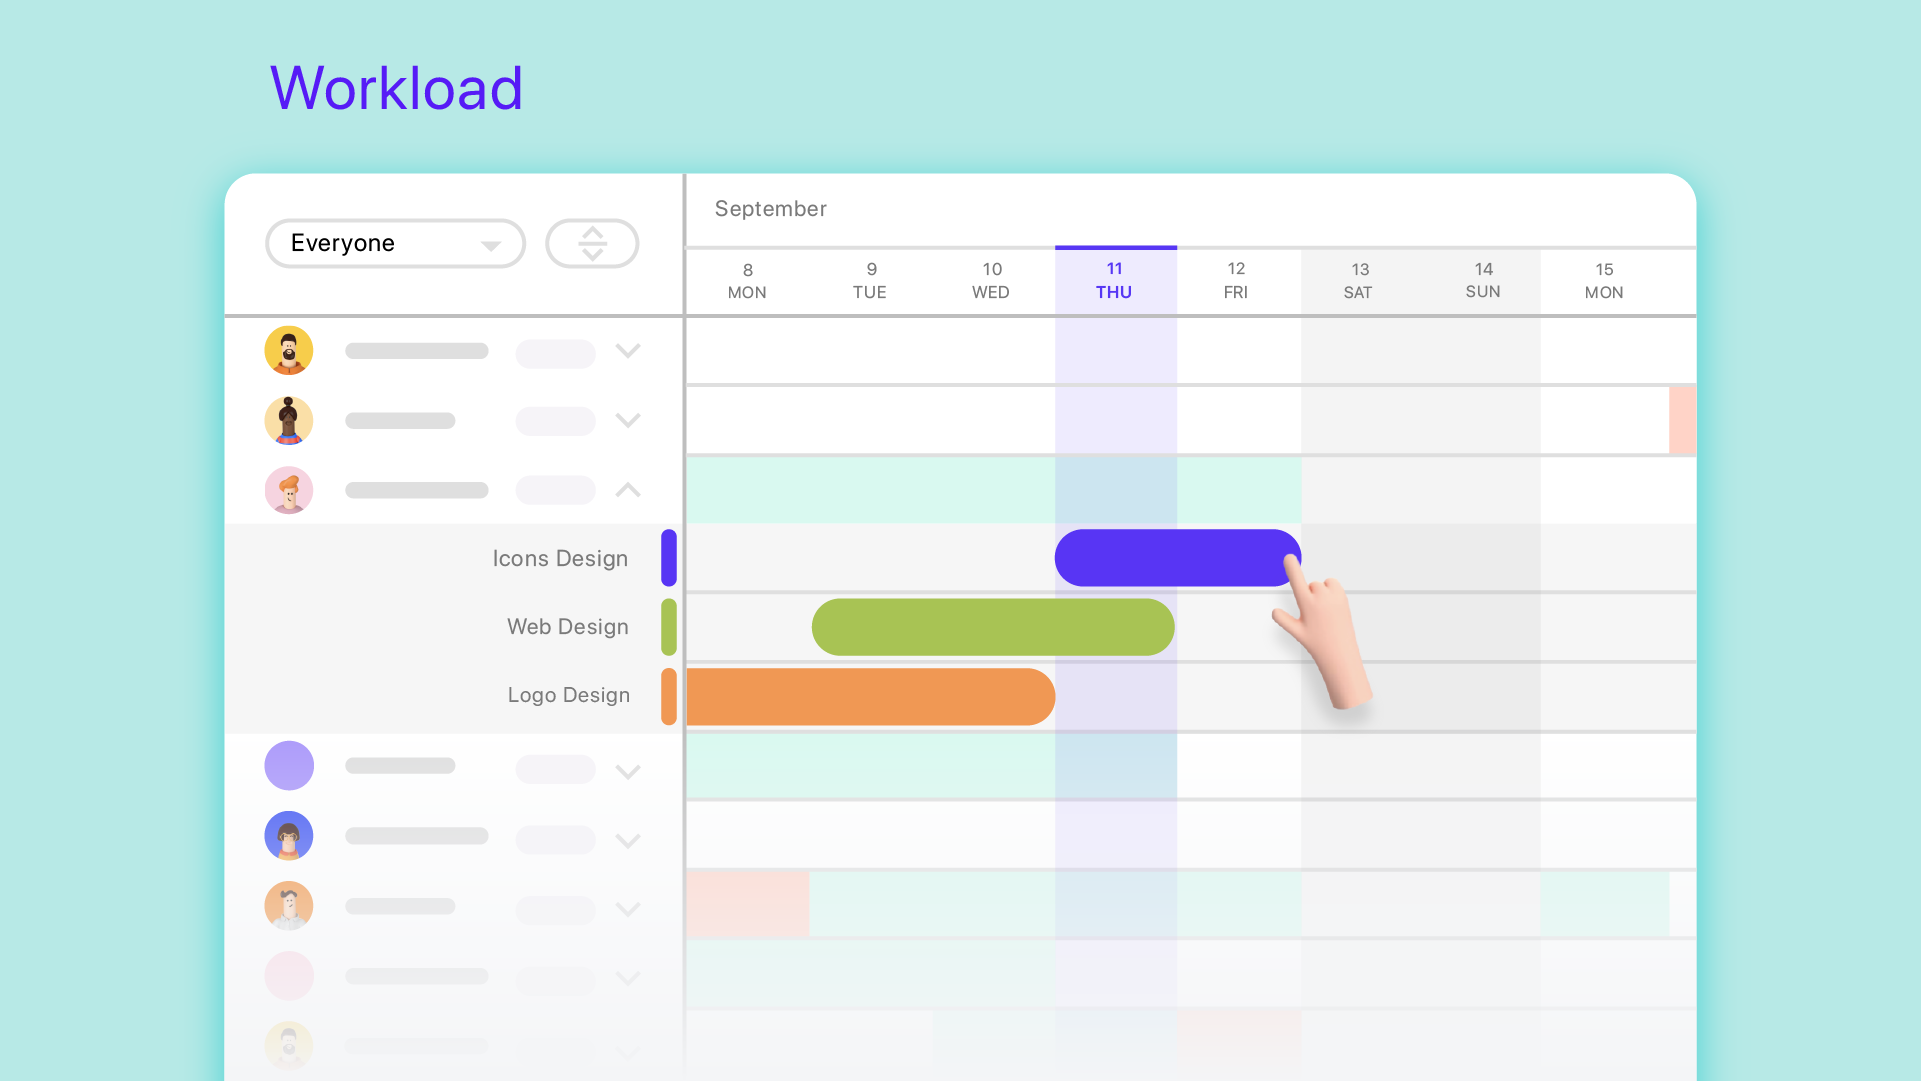 ActiveCollab Software - ActiveCollab Workload is a visual resource management tool built for agencies and creative professionals